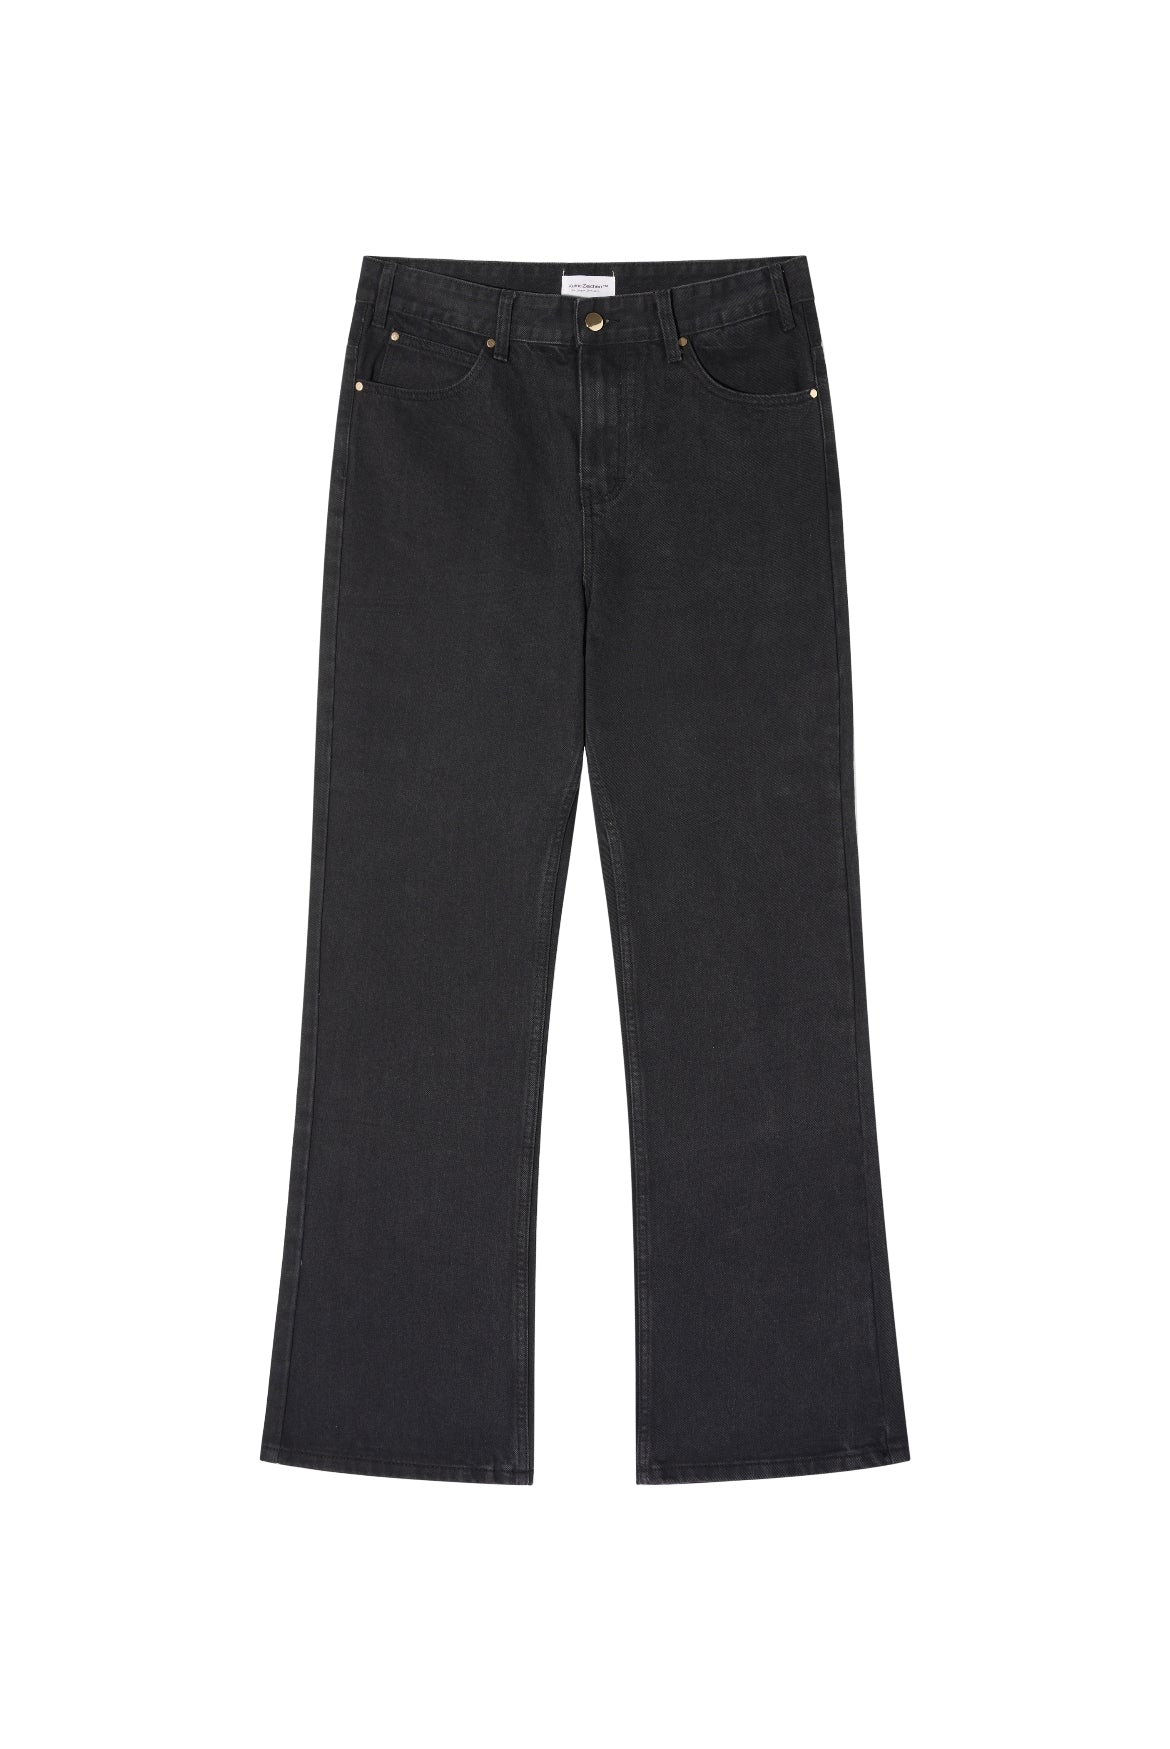 Black Bootcut Jeans Washed Retro Distressed - Carvan Mart